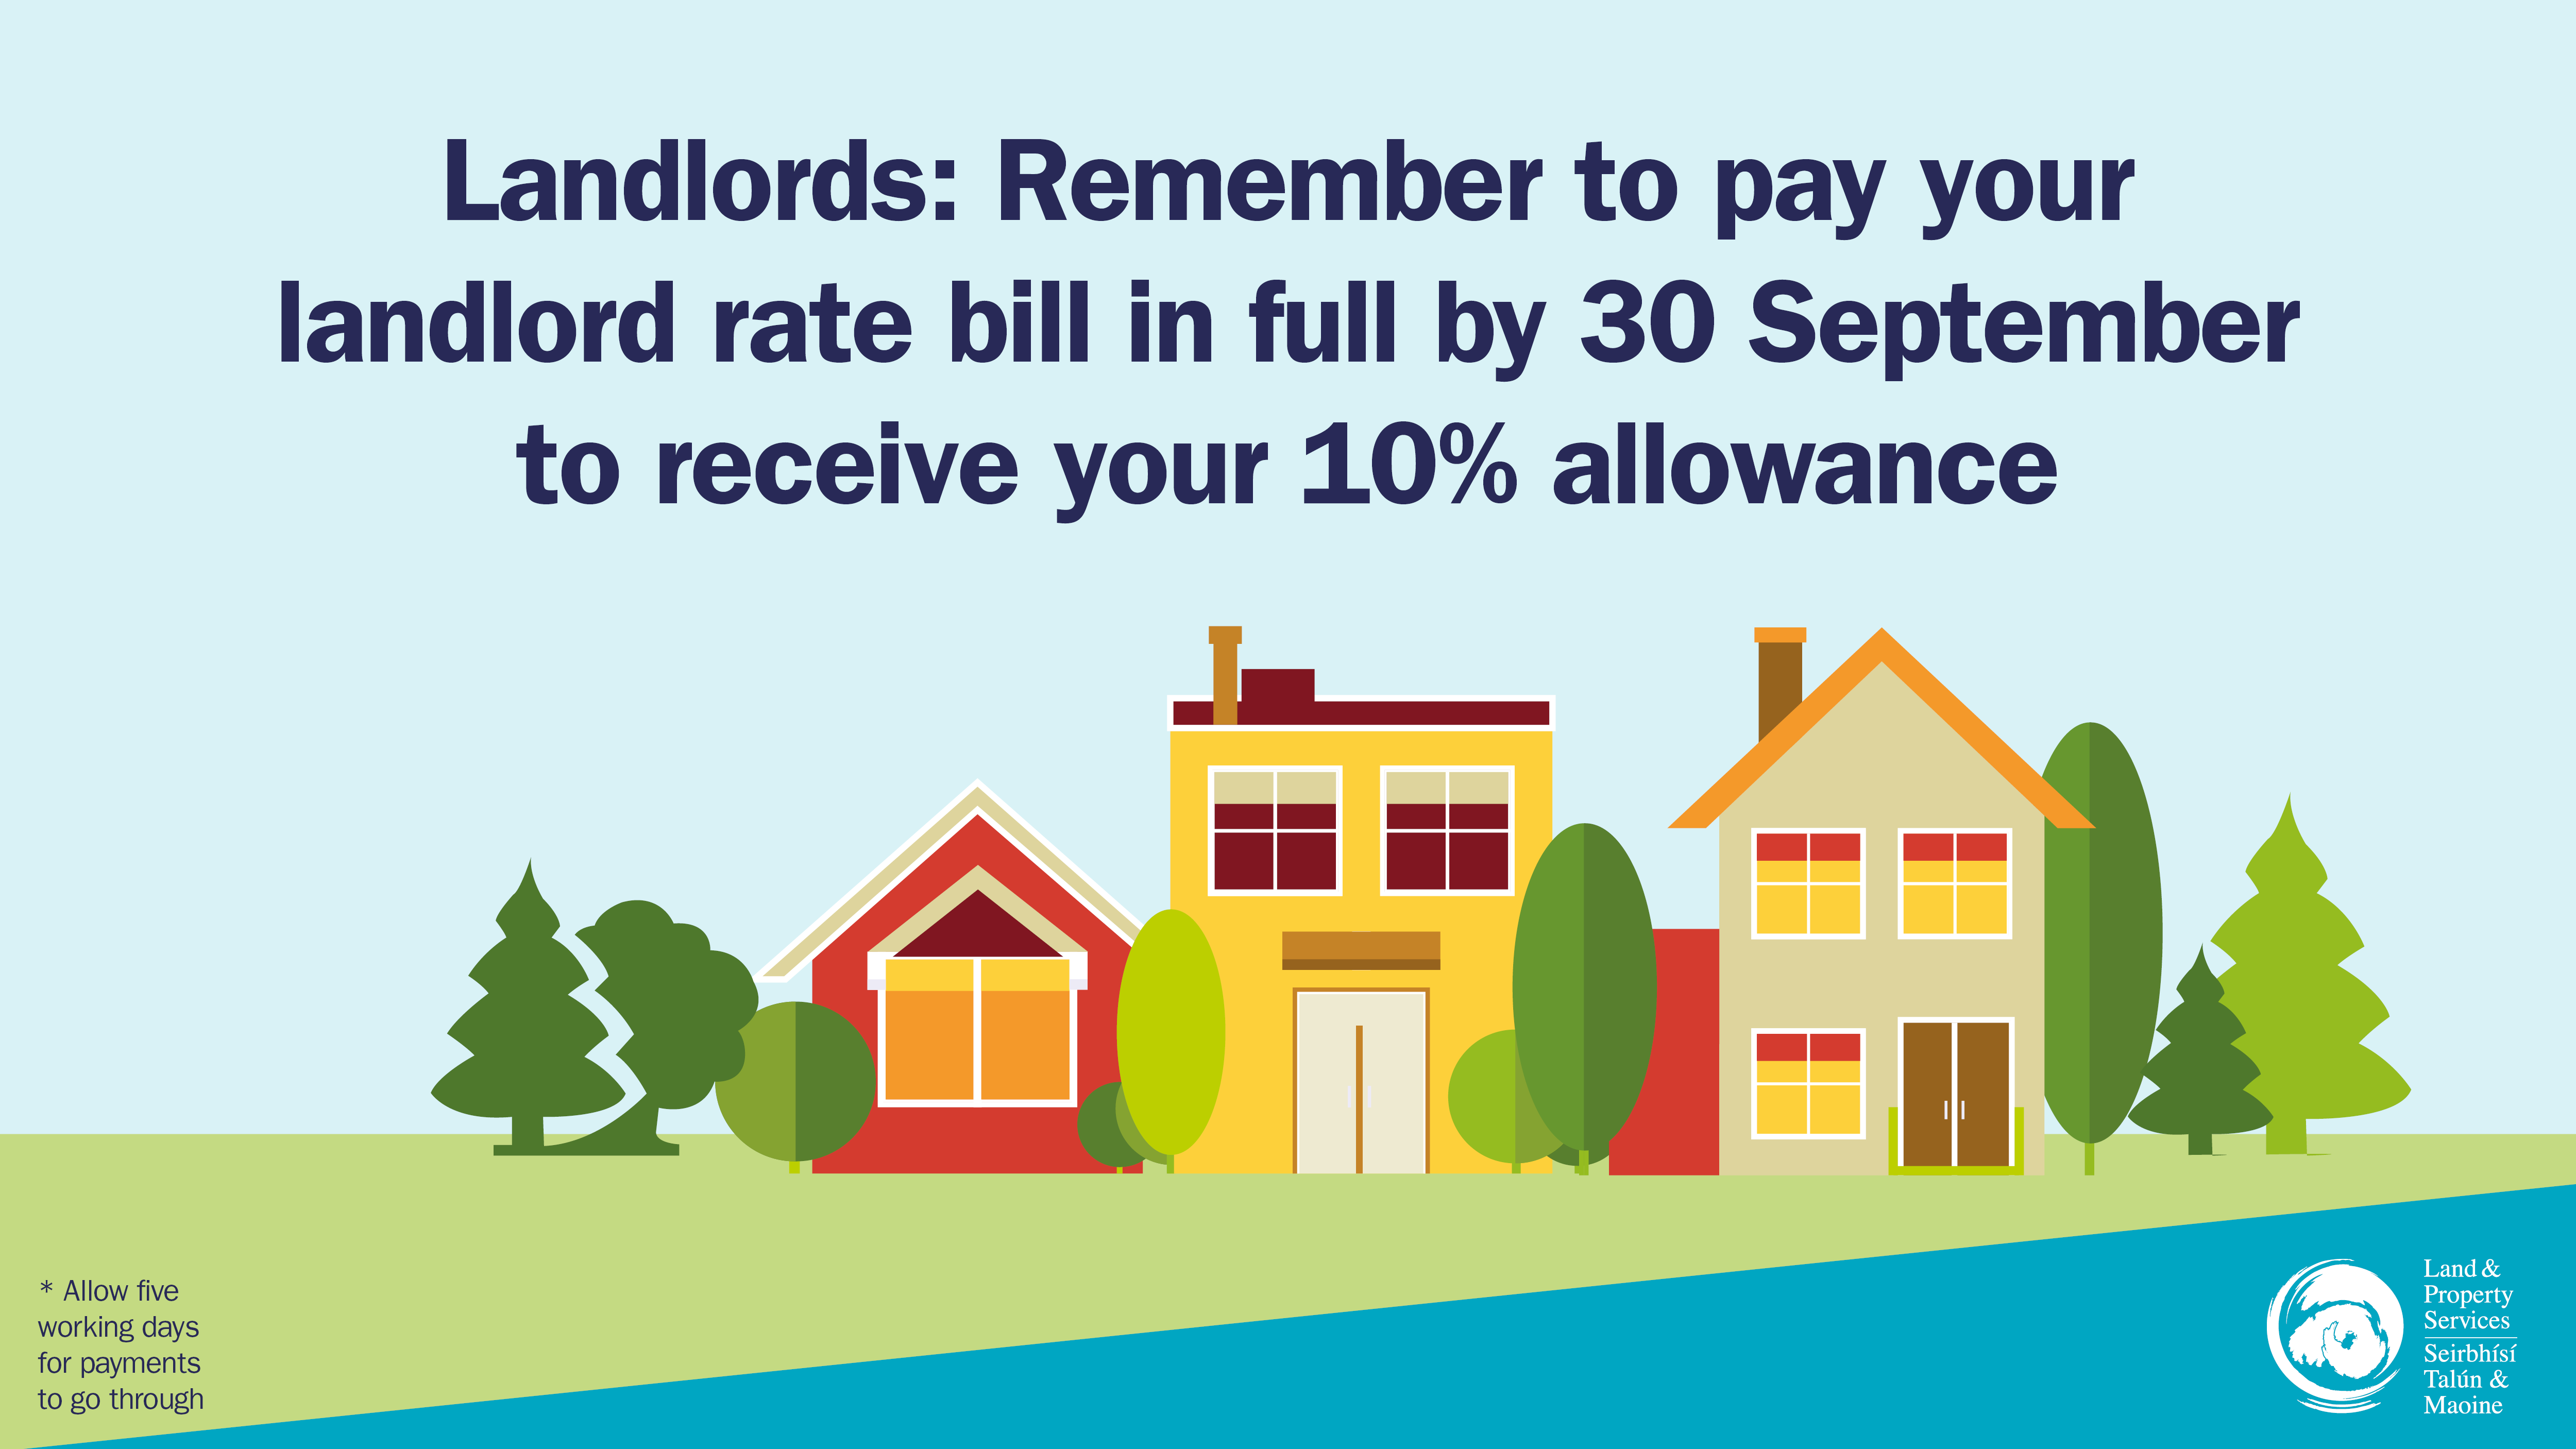 Landlords rates discount deadline approaching | Department of Finance